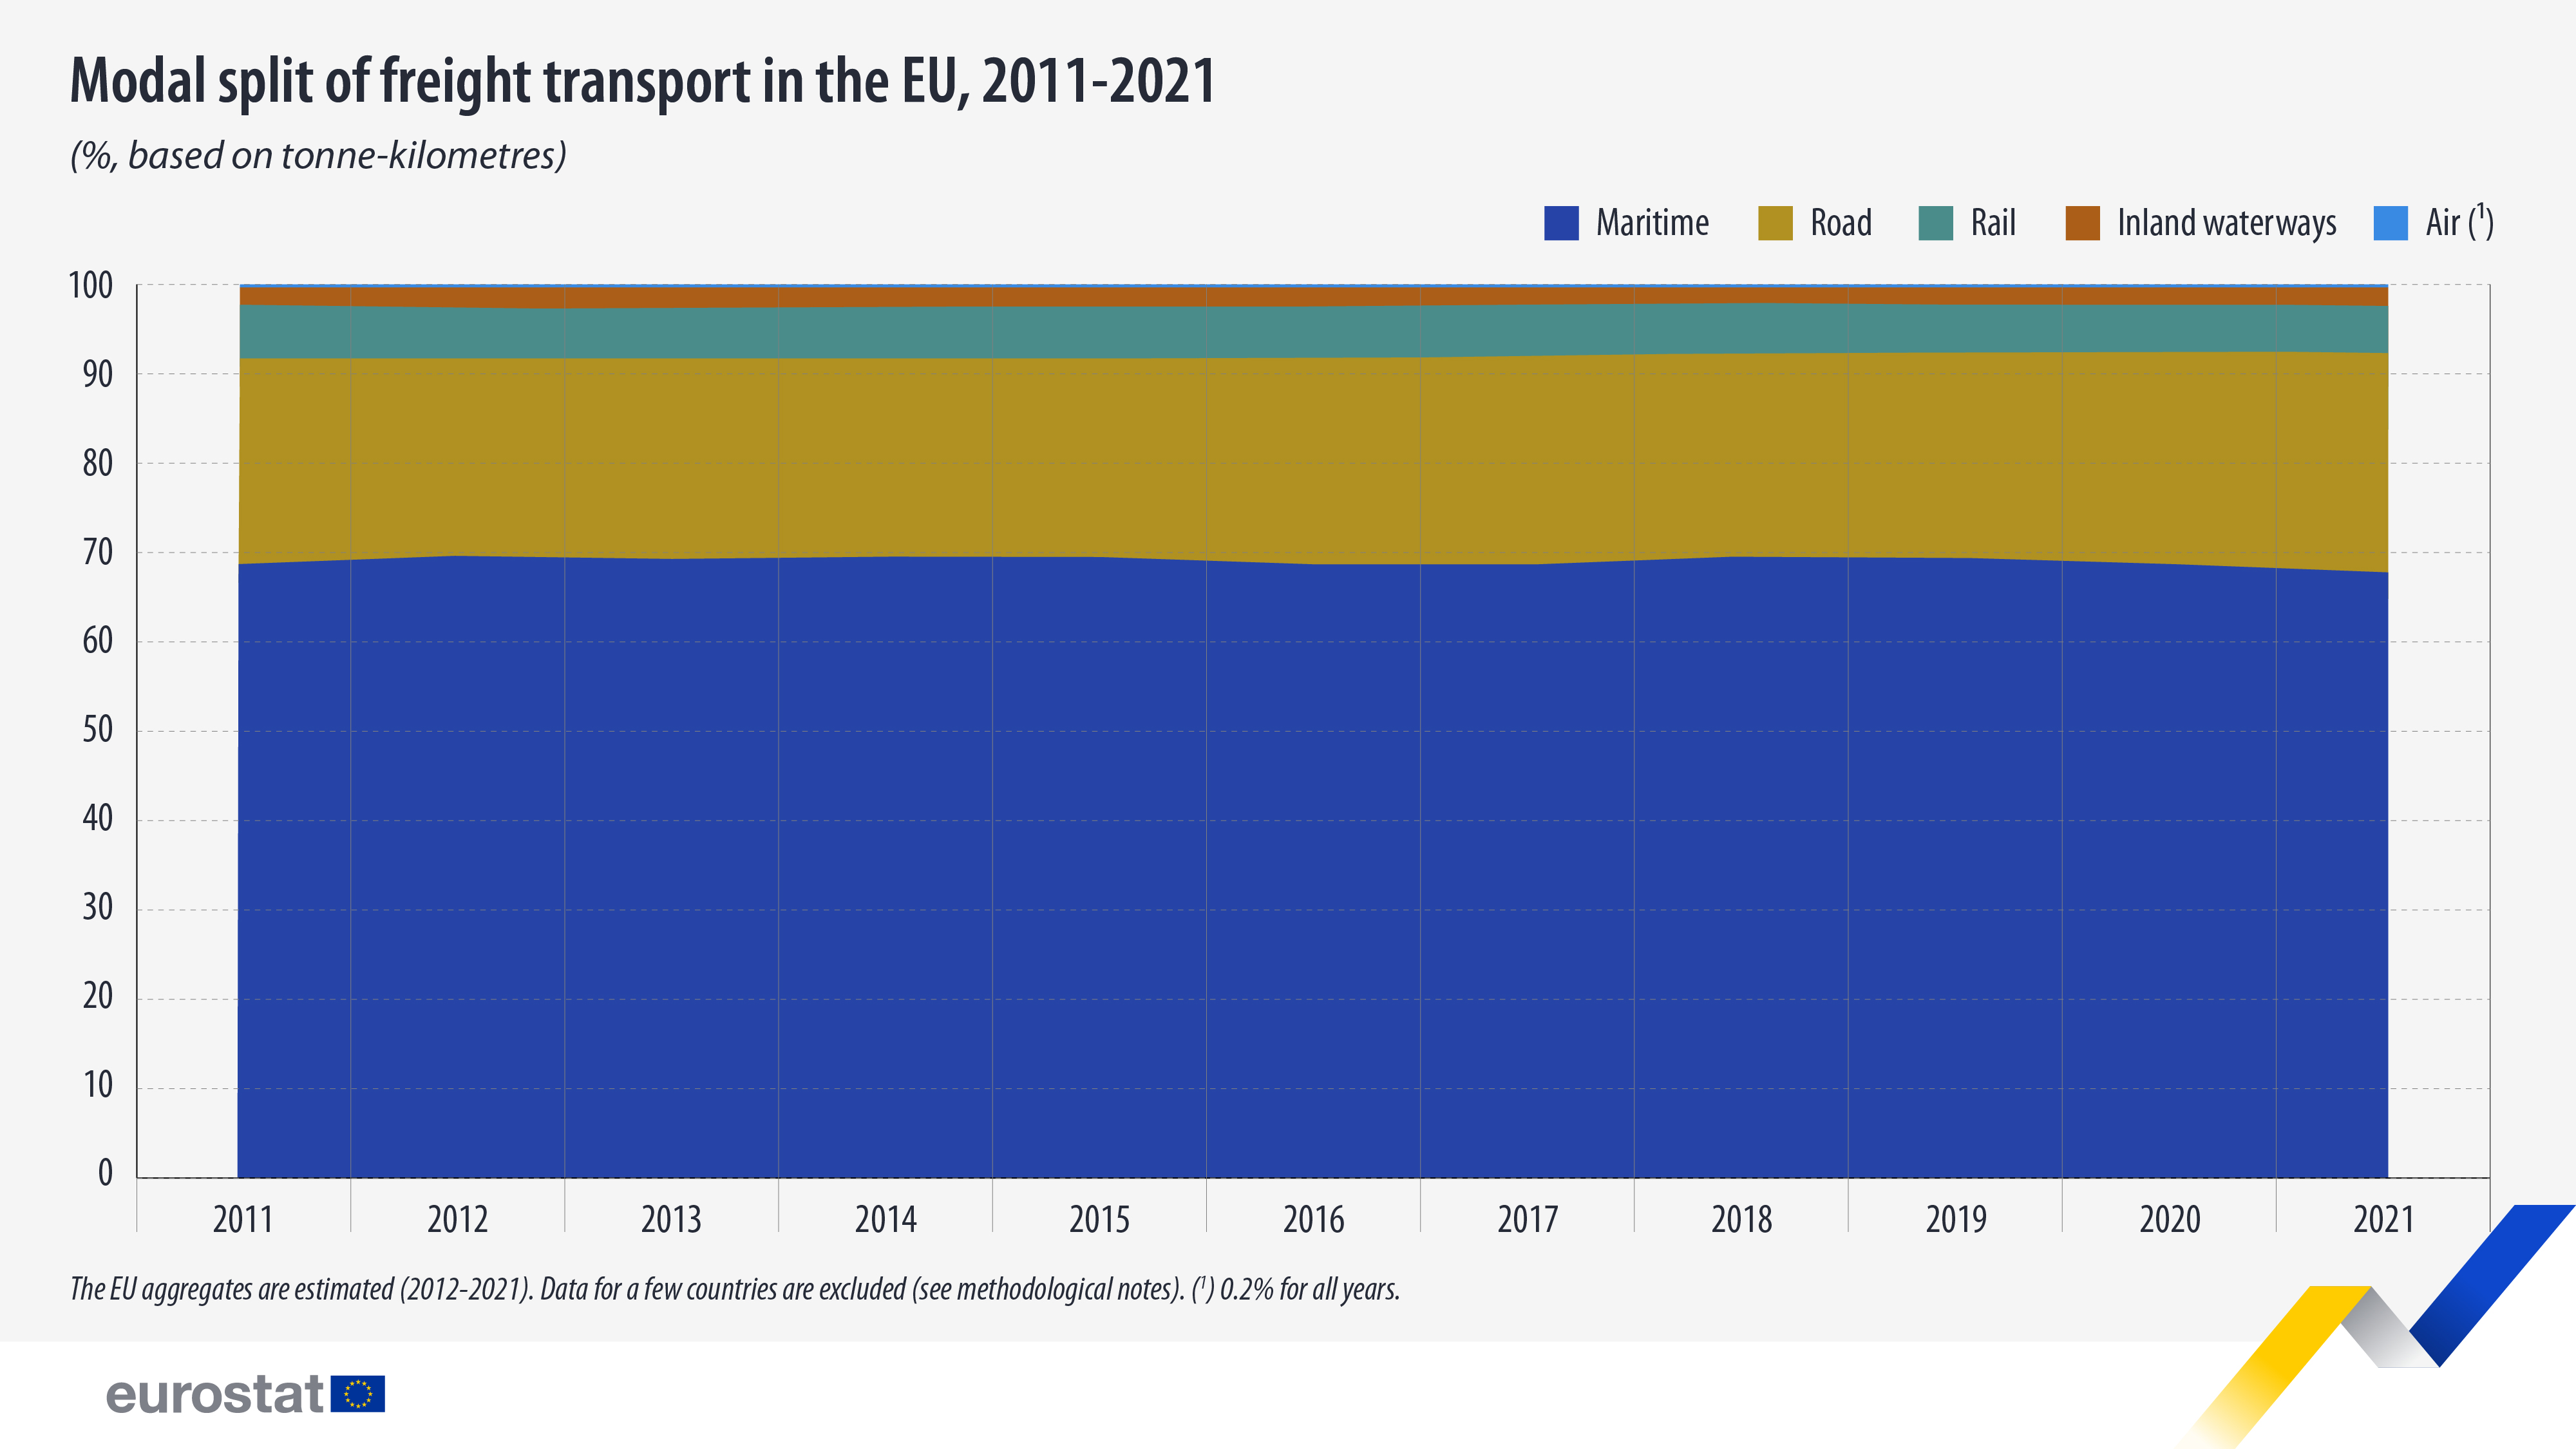 Stacked area graph: Modal split of freight transport in the EU, 2011-2021, in %, based on tonne-kilometres